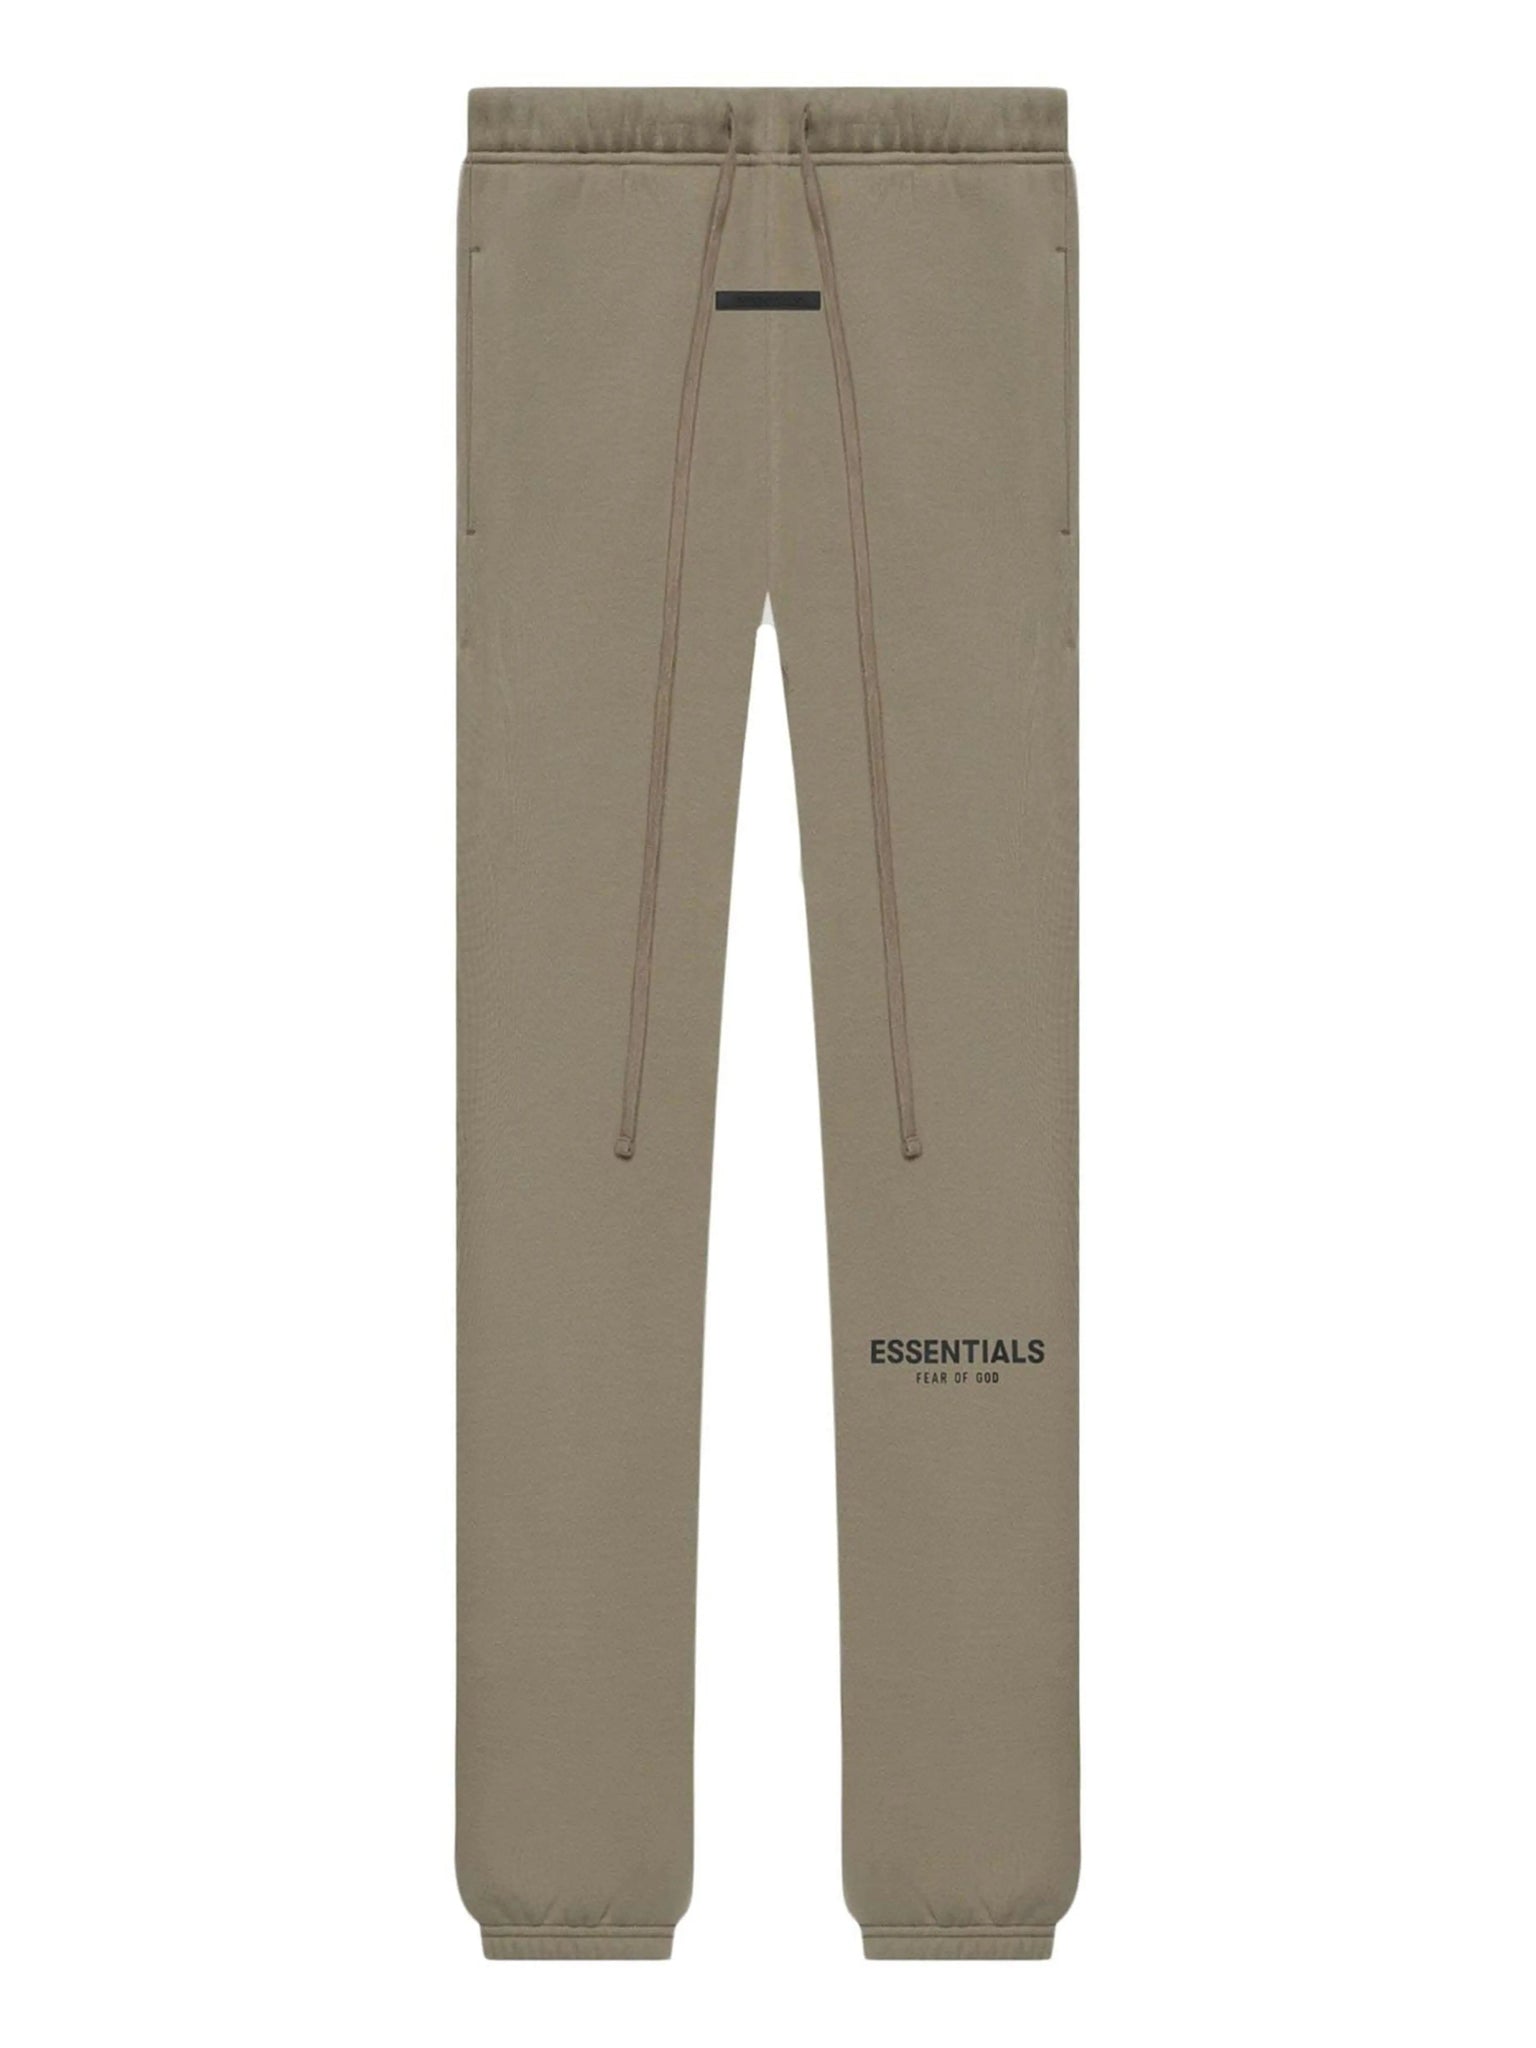 Fear Of God Essentials Sweatpant Taupe [SS21] Prior